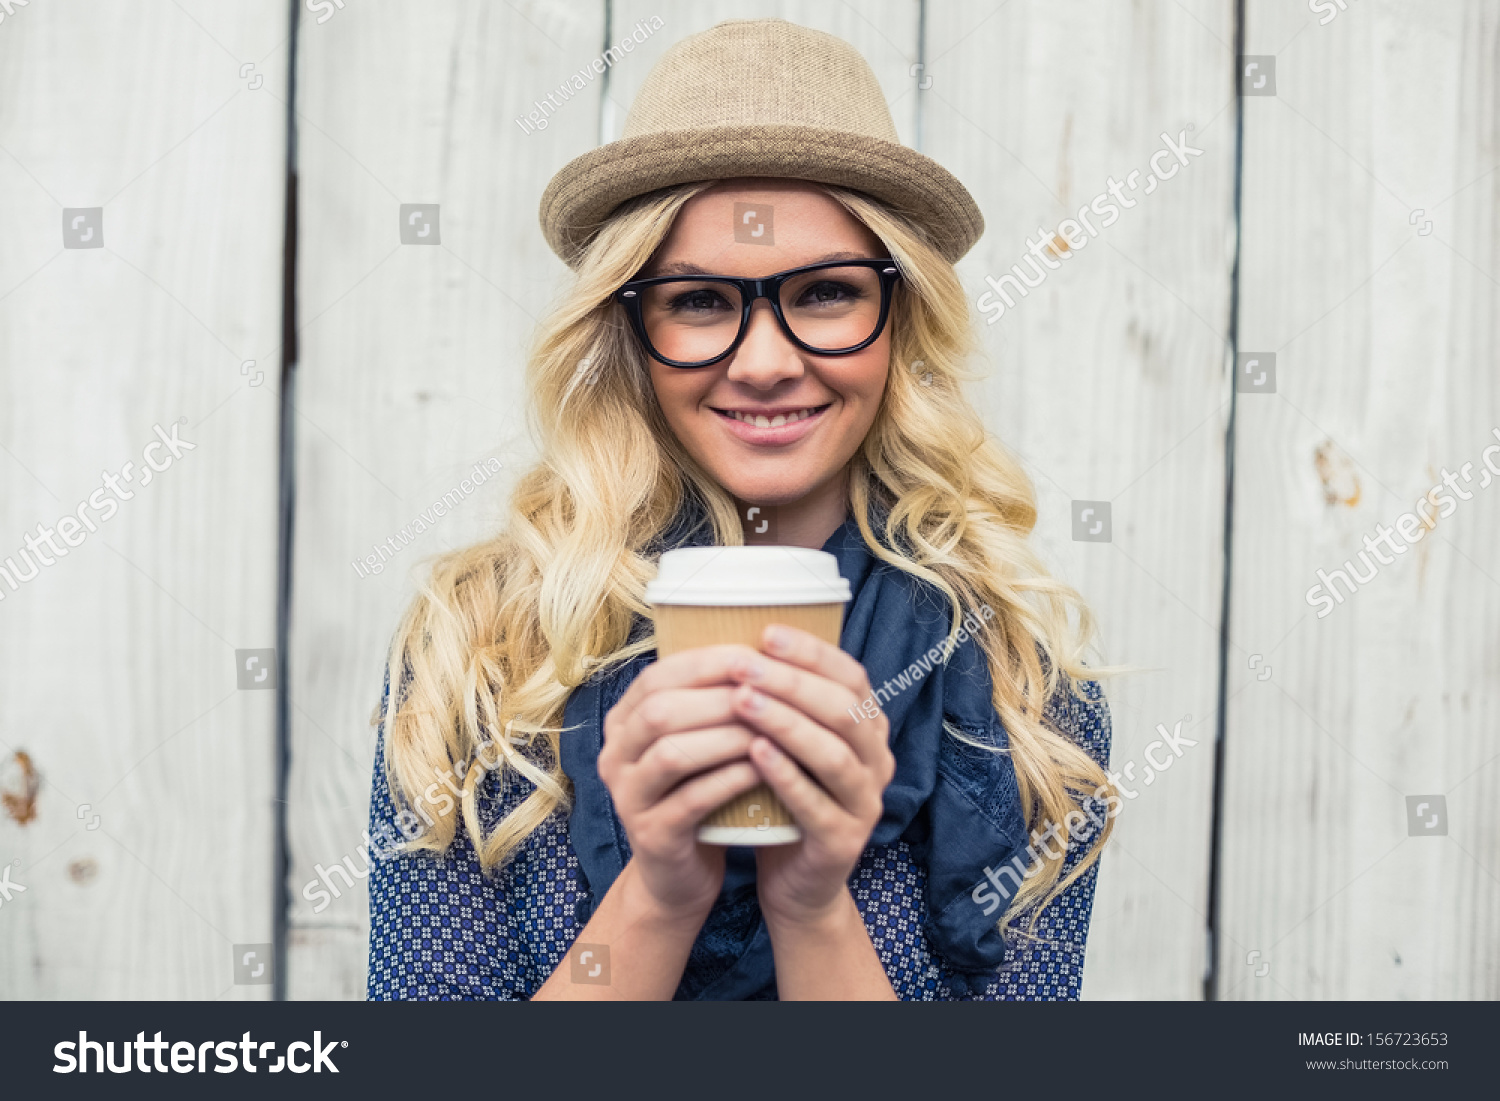 Cheerful fashionable blonde holding coffee outdoors on wooden background #156723653